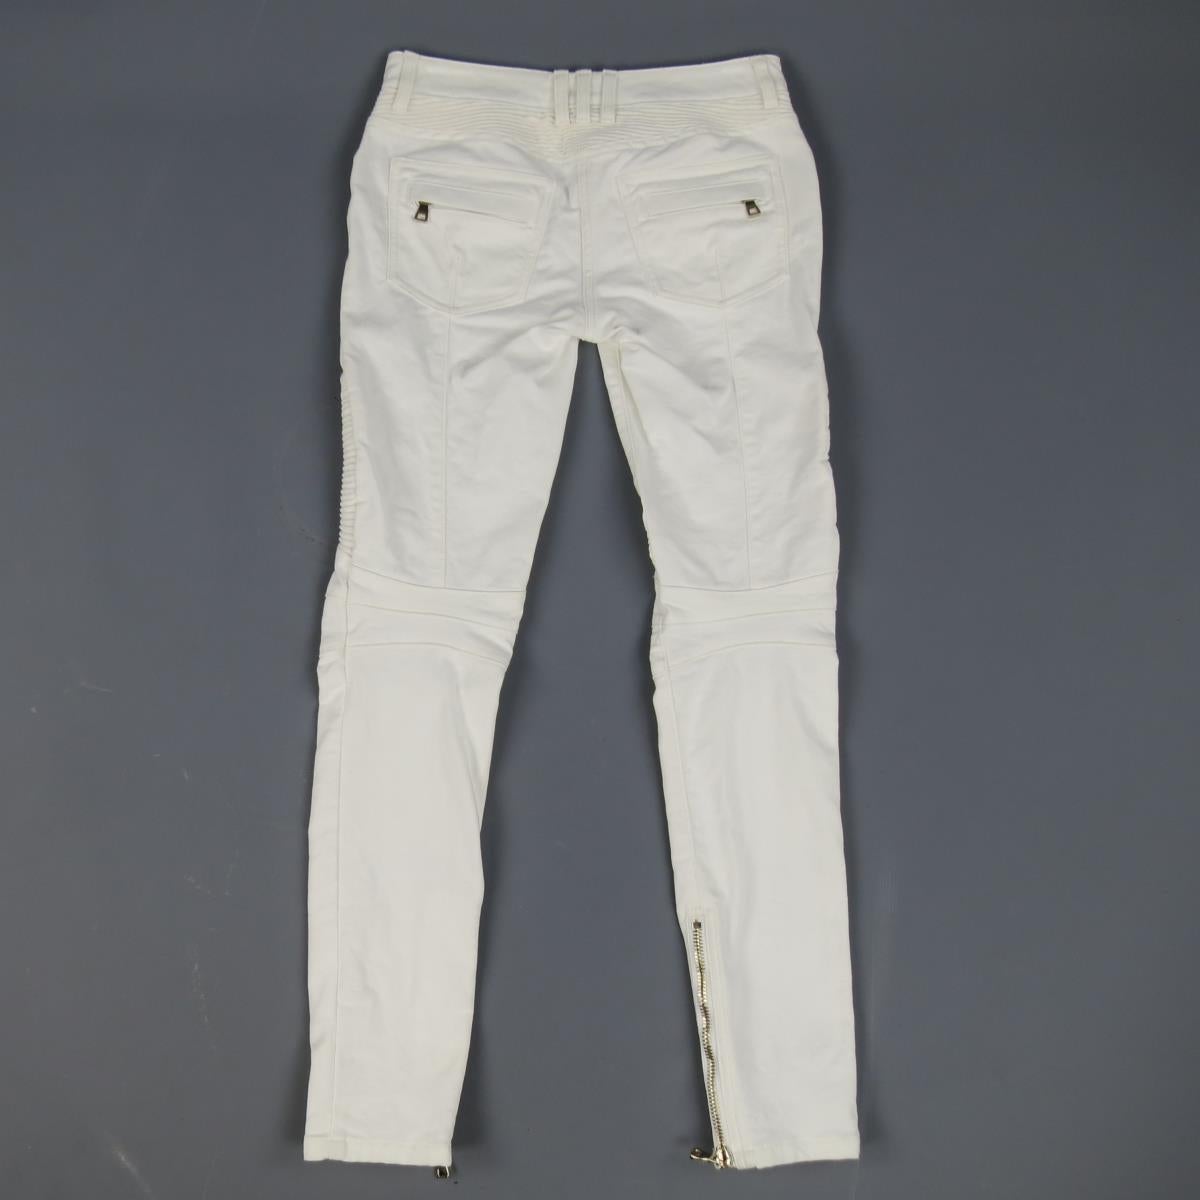 Signature BALMAIN motorcycle jeans in a white cotton twill featuring 
a low rise, double zip frontal pockets, simulated knee pads, ribbed panels, and zip leg closure. 
Excellent Pre-Owned Condition.
 

Marked:   36
 

Measurements: 
  
l	Waist: 30